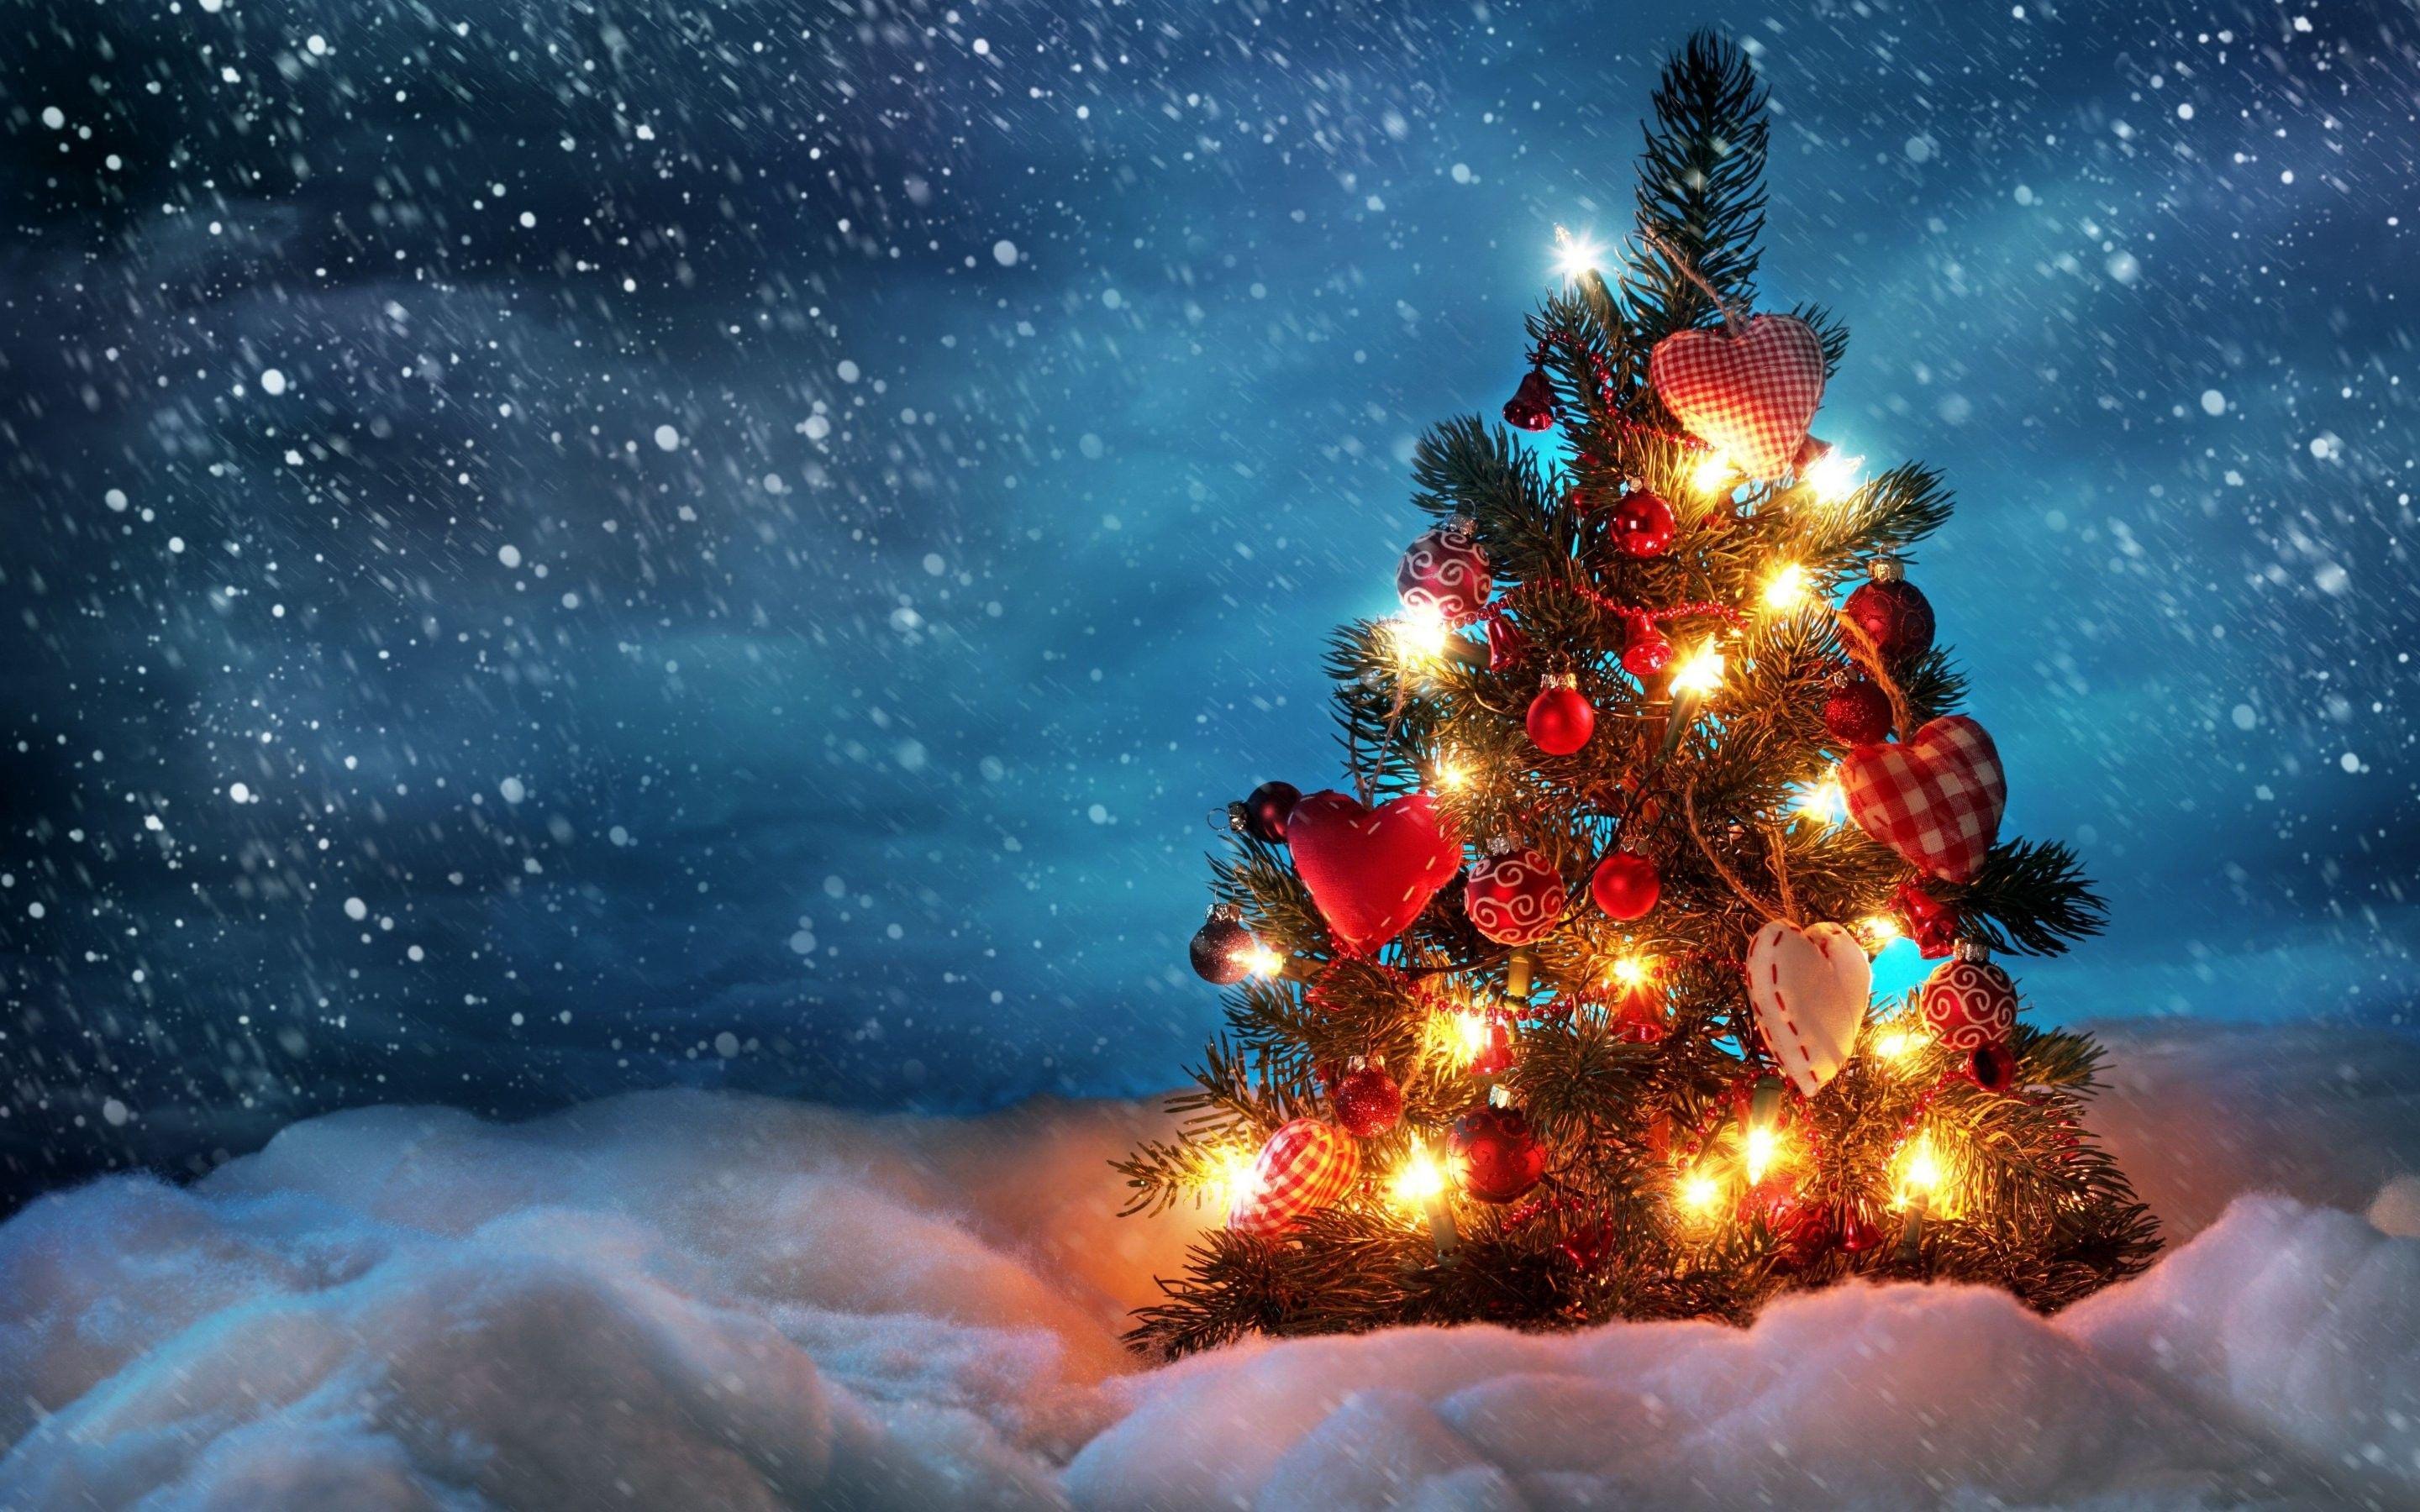 Snowy Christmas Wallpaper Free Snowy Christmas Background